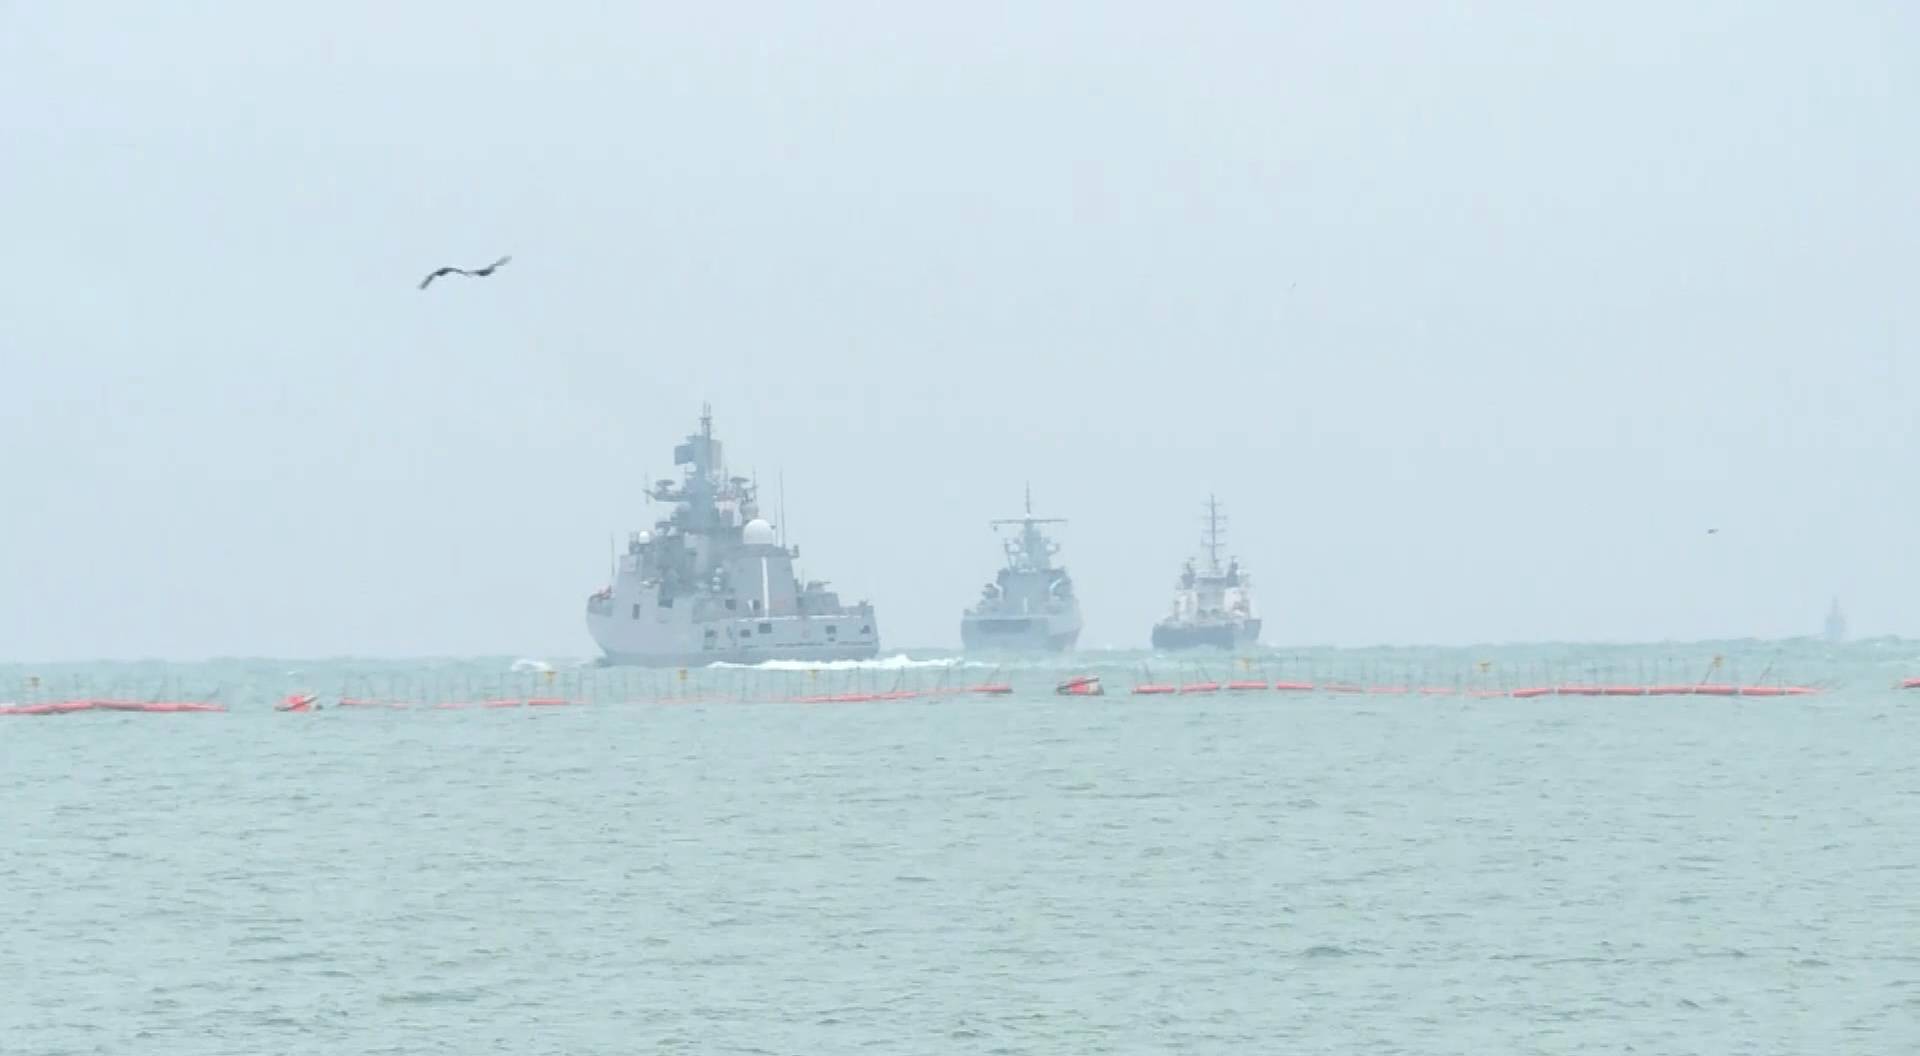 Warships of the Russian Black Sea fleet are seen during naval drills near Crimea